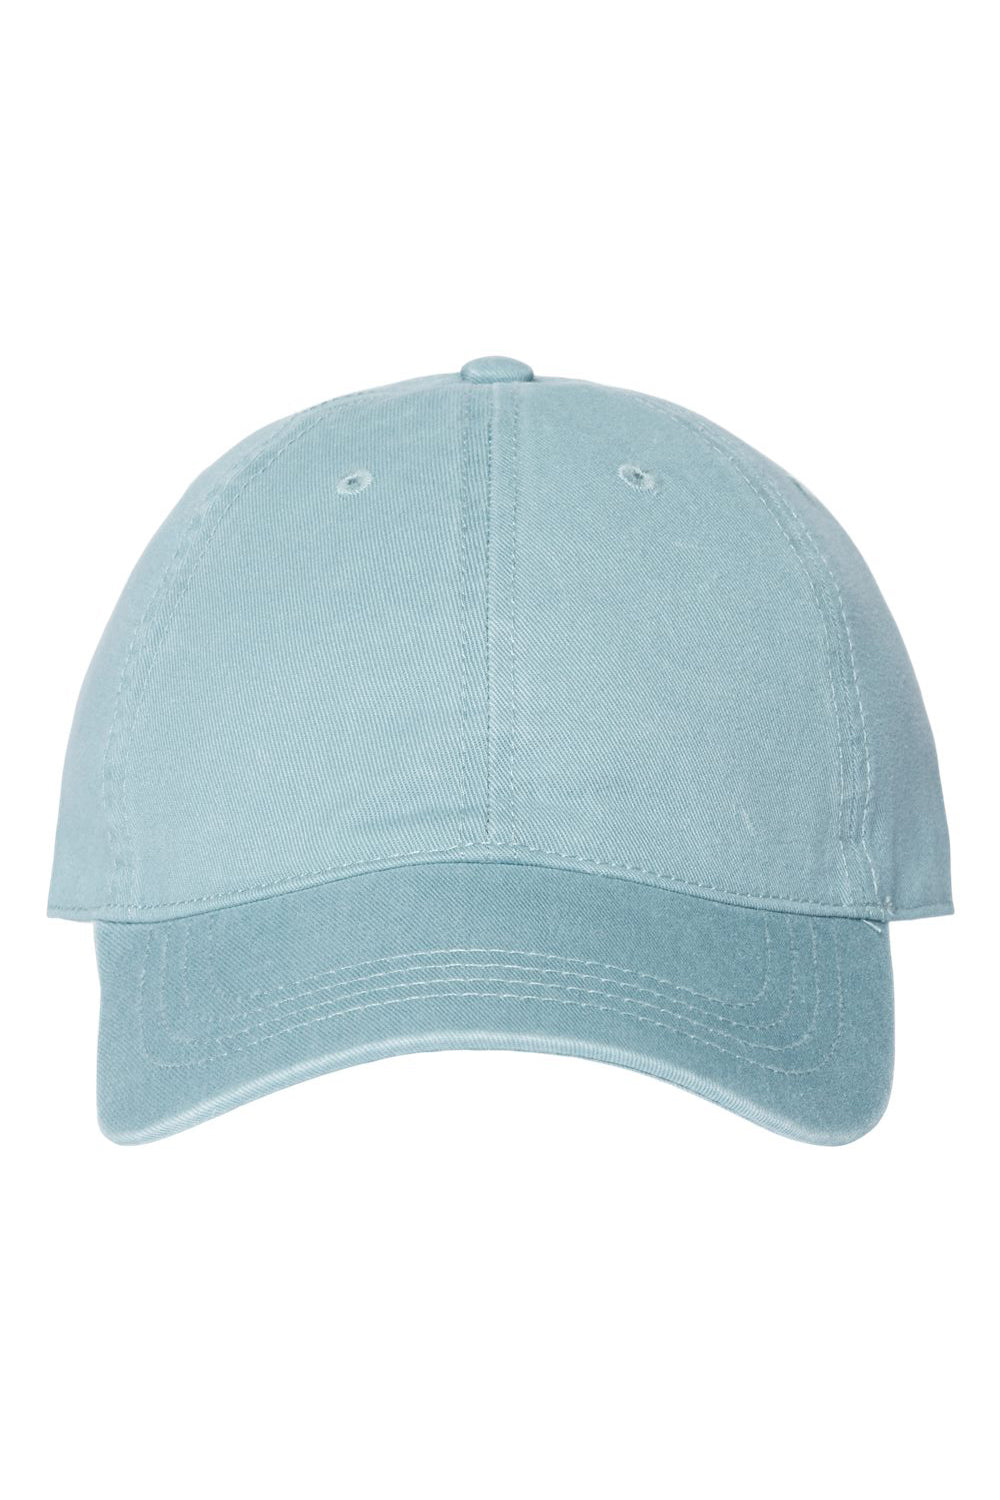 Cap America i1002 Mens Relaxed Adjustable Dad Hat Smoke Blue Flat Front